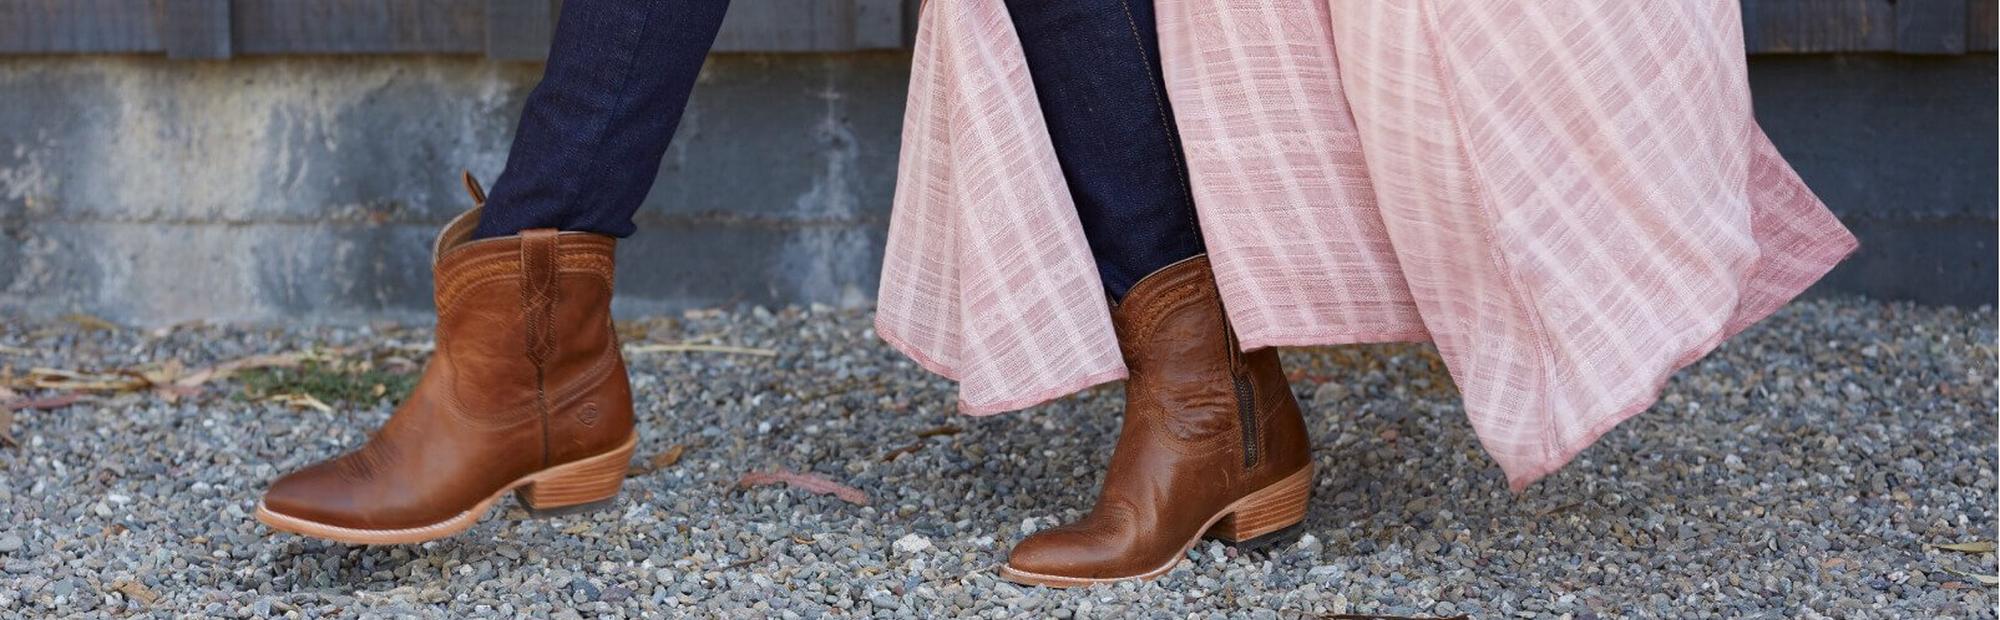 Can You Wear Cowboy Boots With Skinny Jeans?